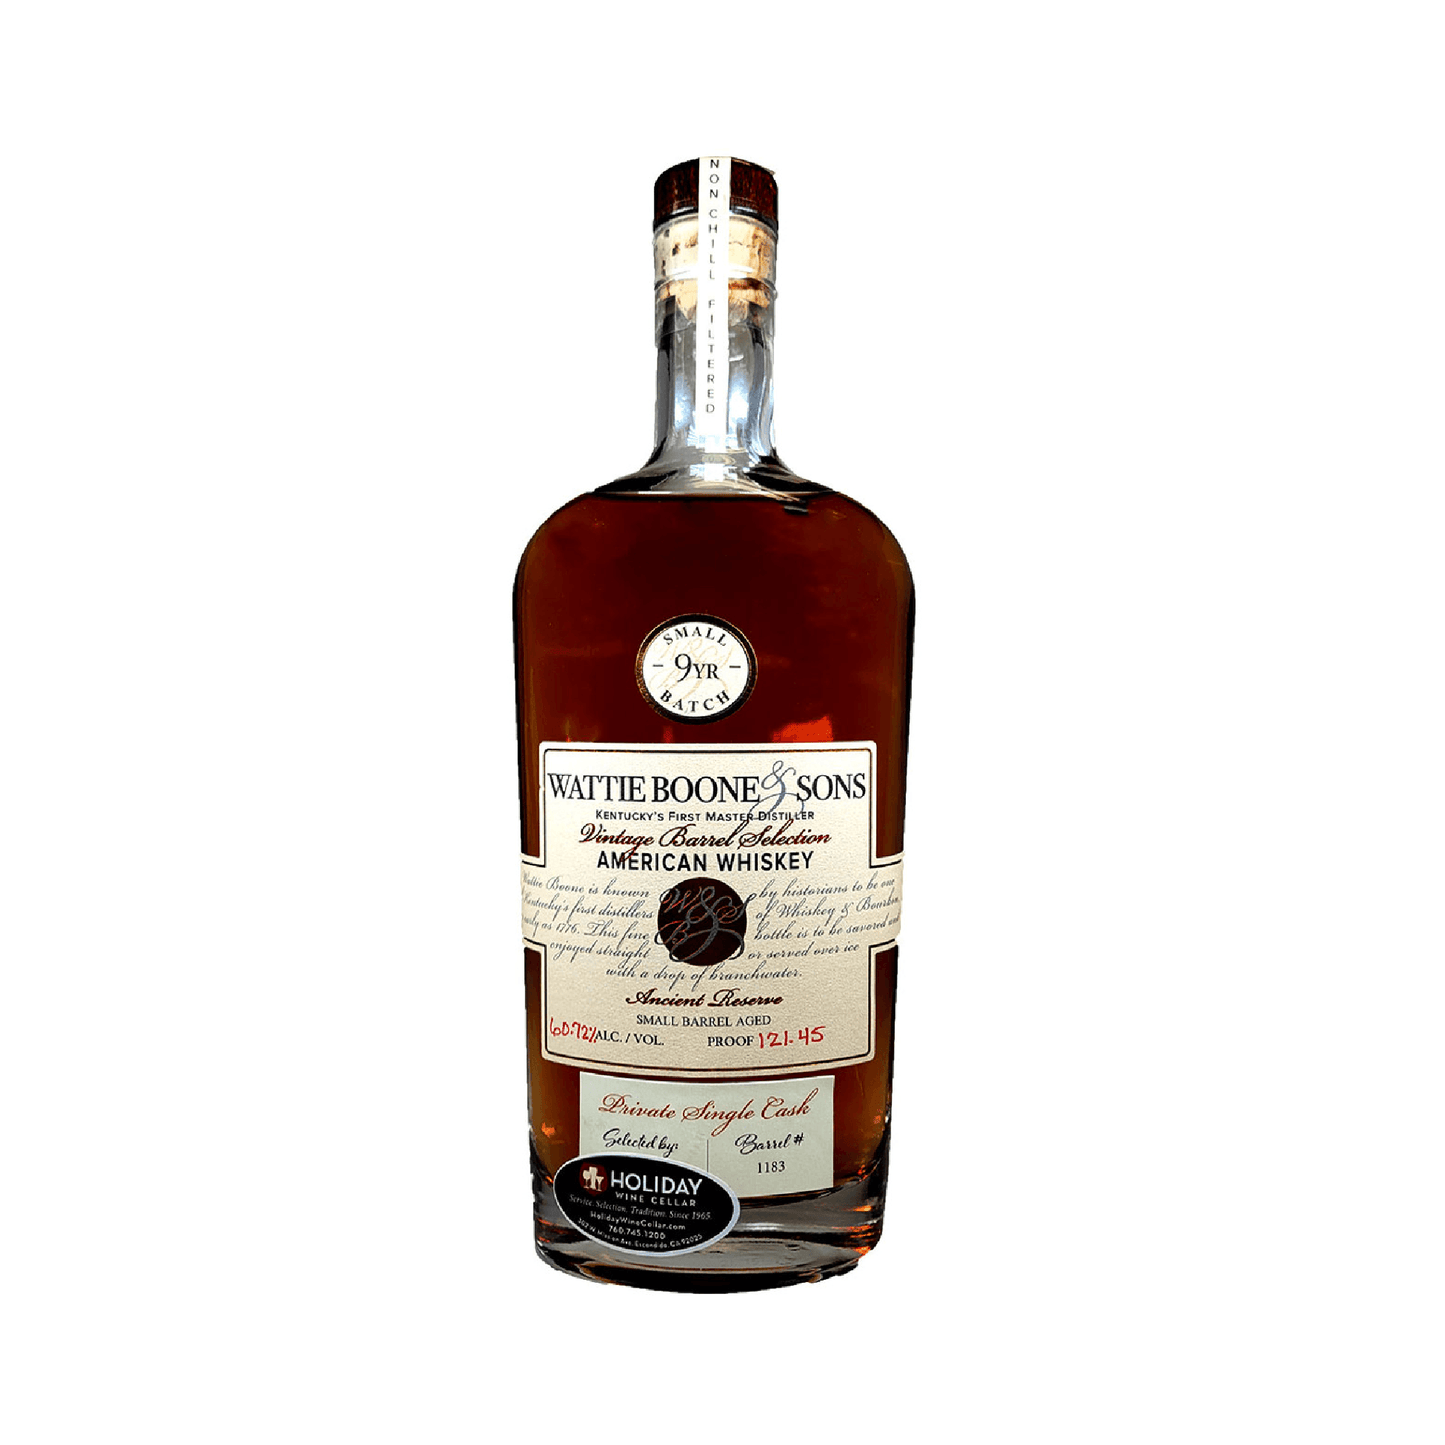 Wattie Boone & Sons Blended American Whiskey Vintage Barrel Selection Ancient 9 Yr 121.45 6 Pack - Liquor Geeks